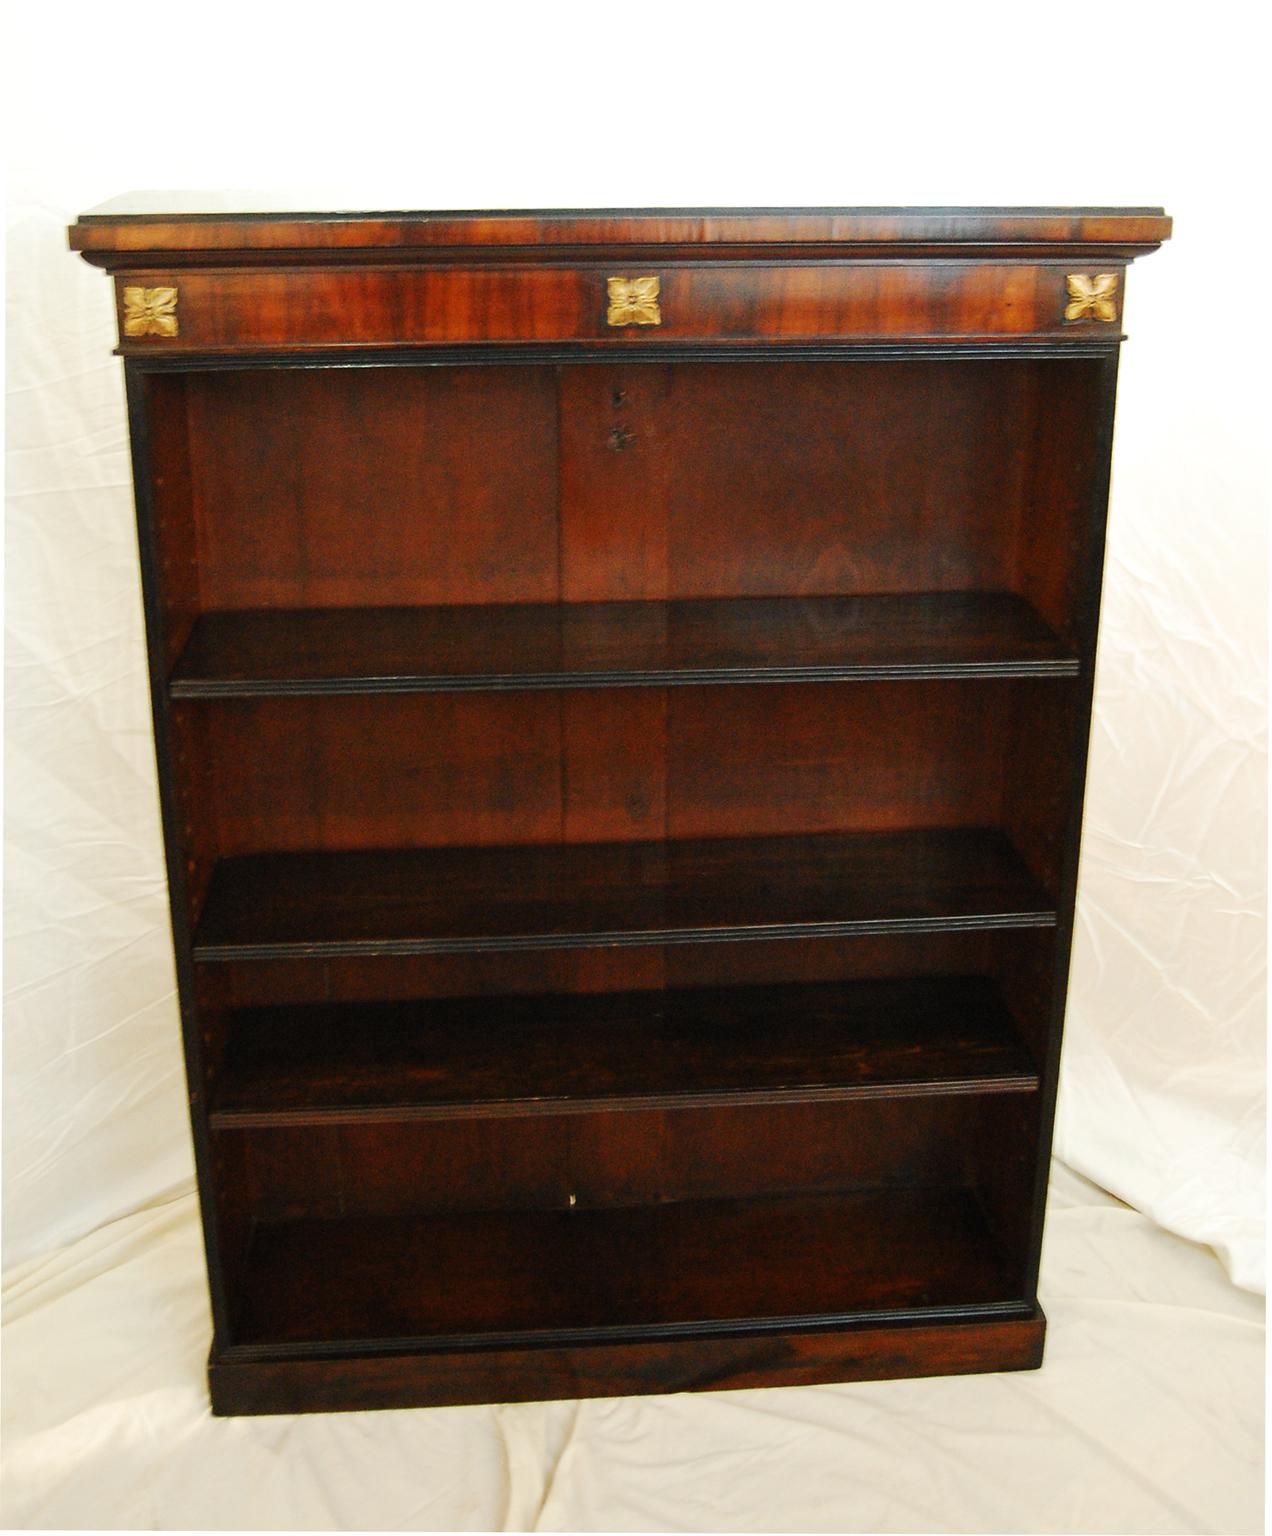 
 English Regency rosewood bookcase with three adjustable shelves. This bookcase is set apart by having an ebonized top and ebonized reeded moldings to the shelves and the carcass. The classic Regency detailing of reeded moldings is subtly accented